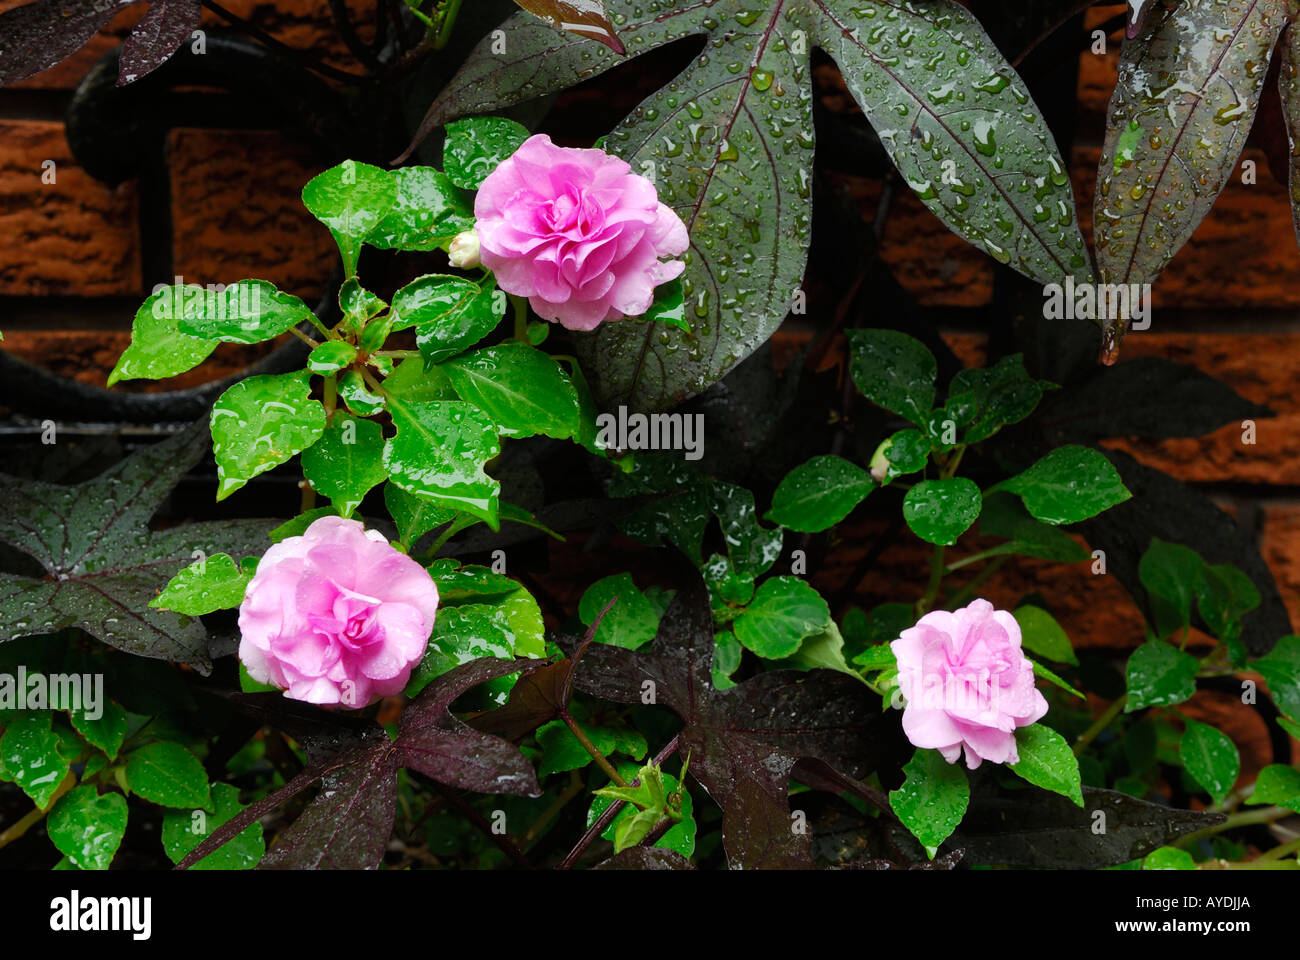 Three pink impatiens flowers and sweet potato vine after a rain Stock Photo